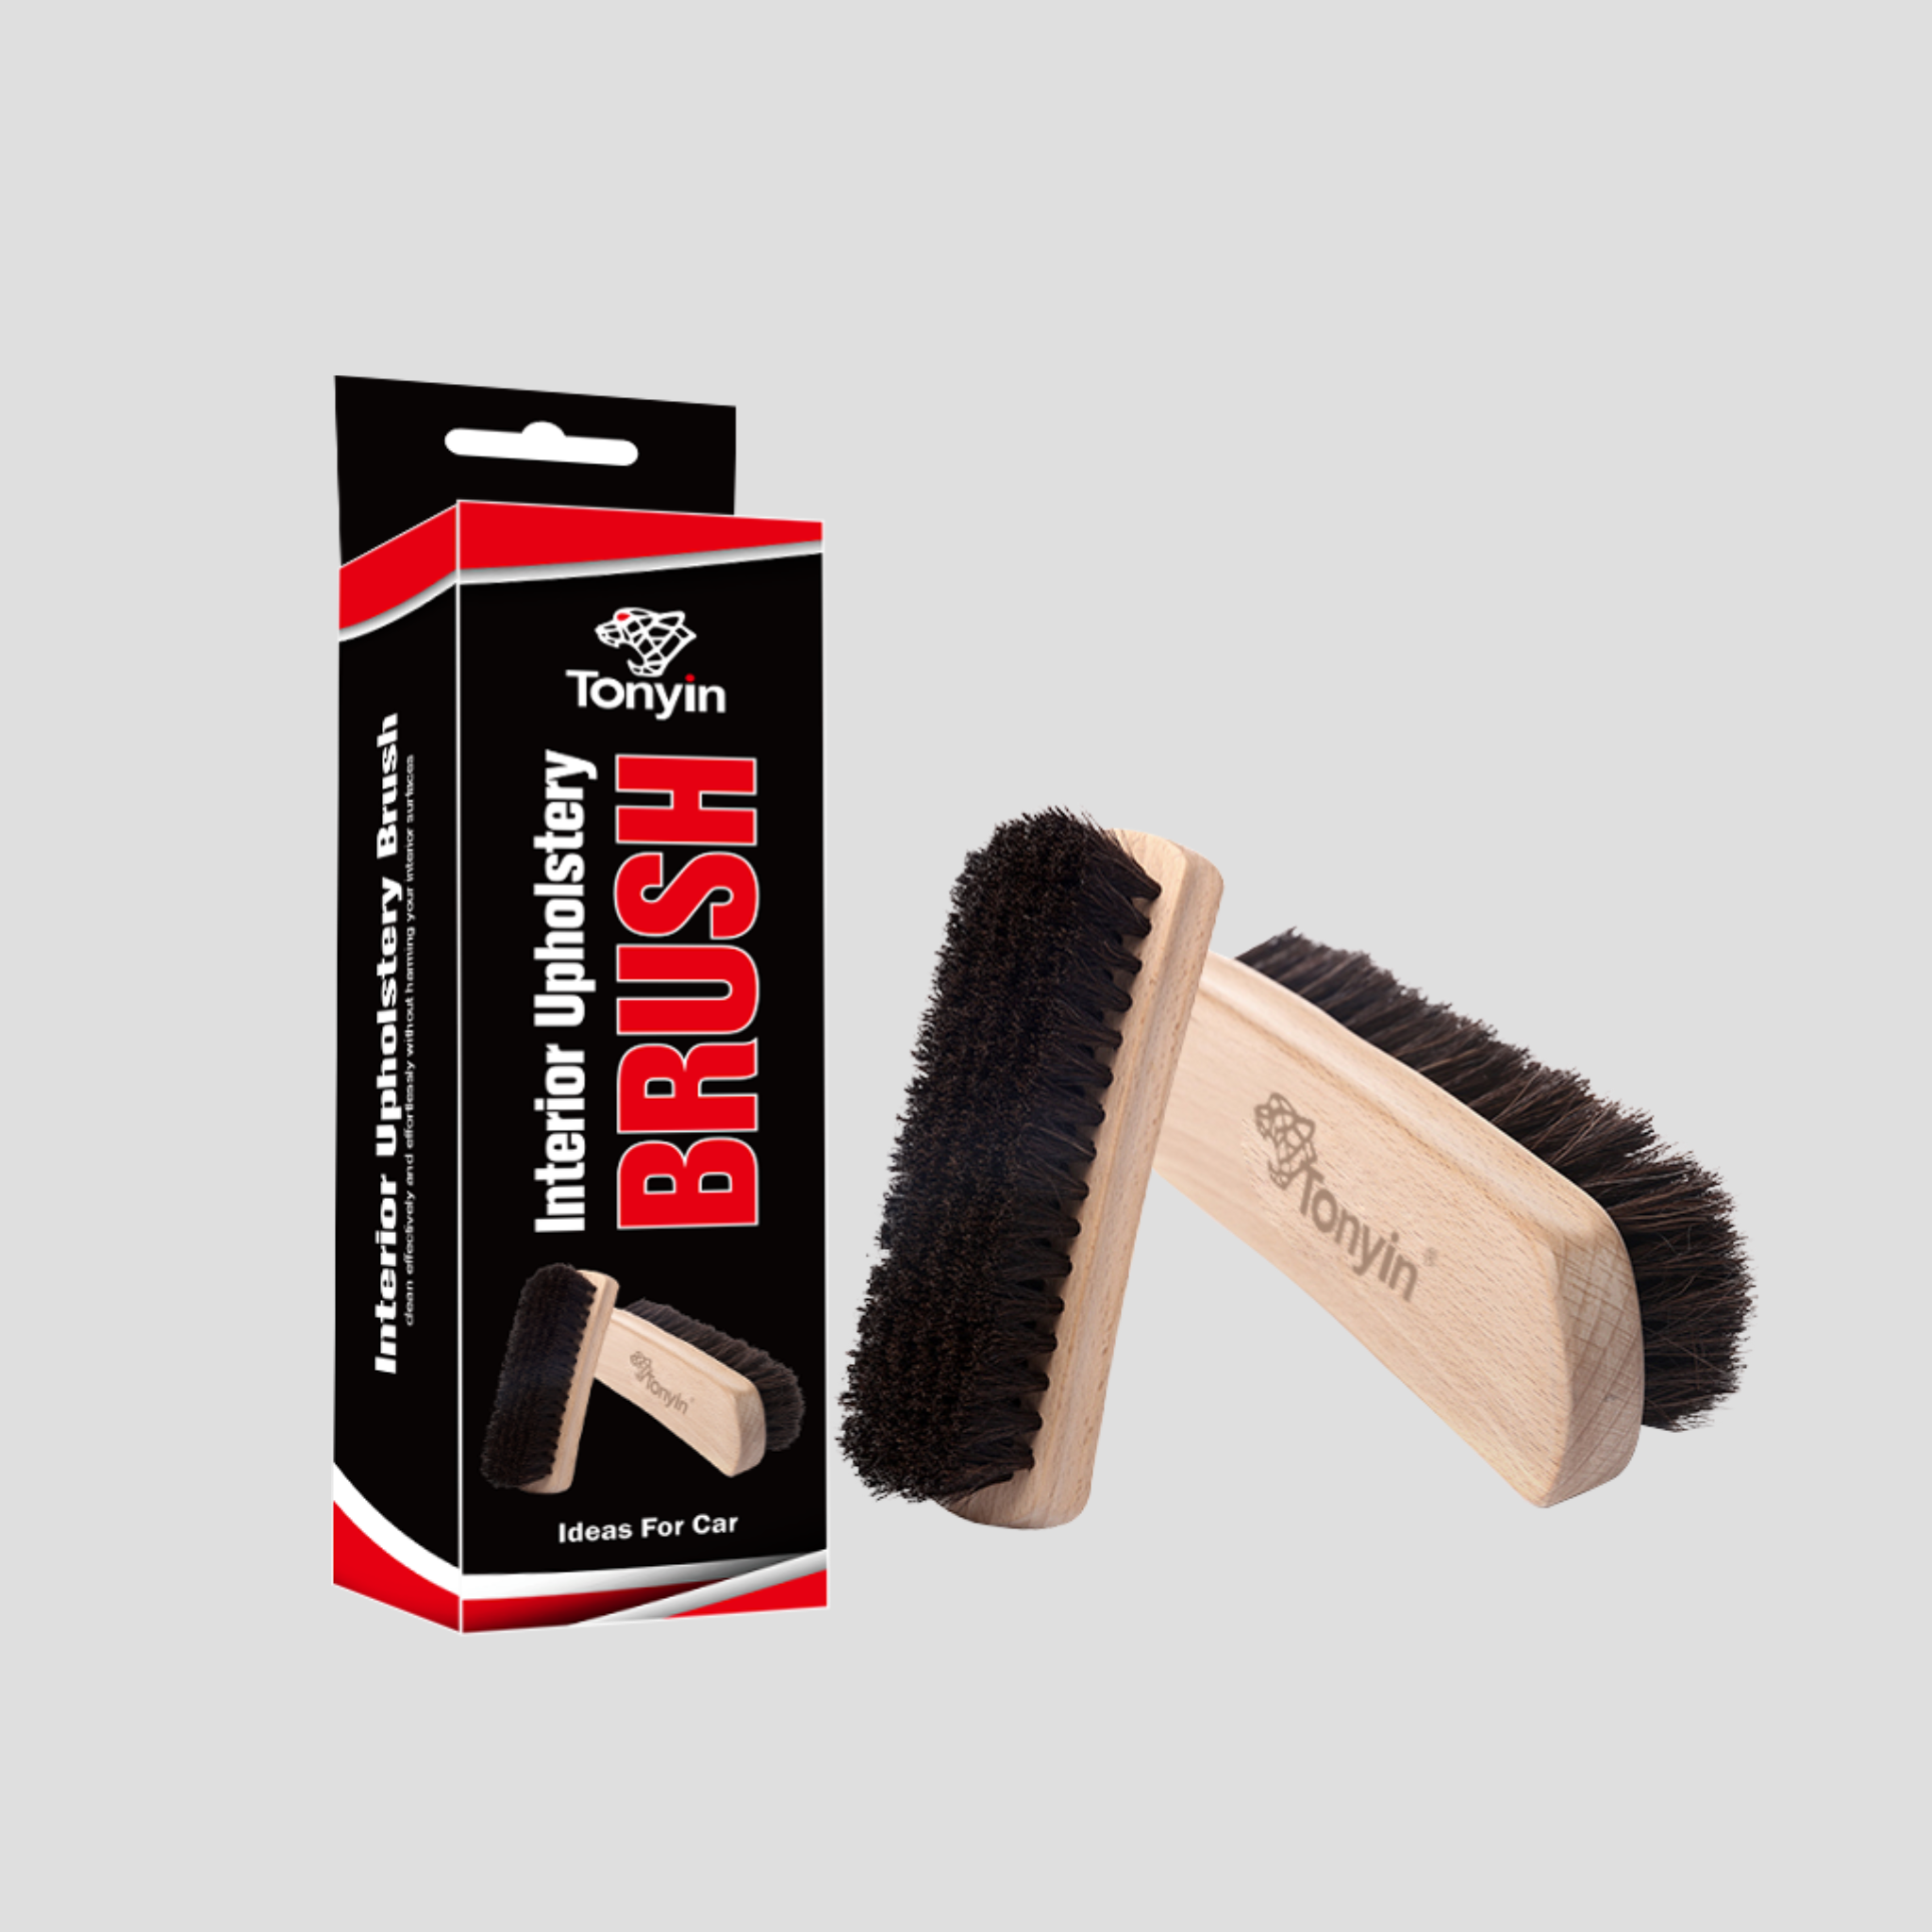 TONYIN INTERIOR UPHOLSTERY BRUSH (LENGTH: 6.8 INCHES WIDTH: 2 INCHES MATERIAL: 100% HORSEHAIR)